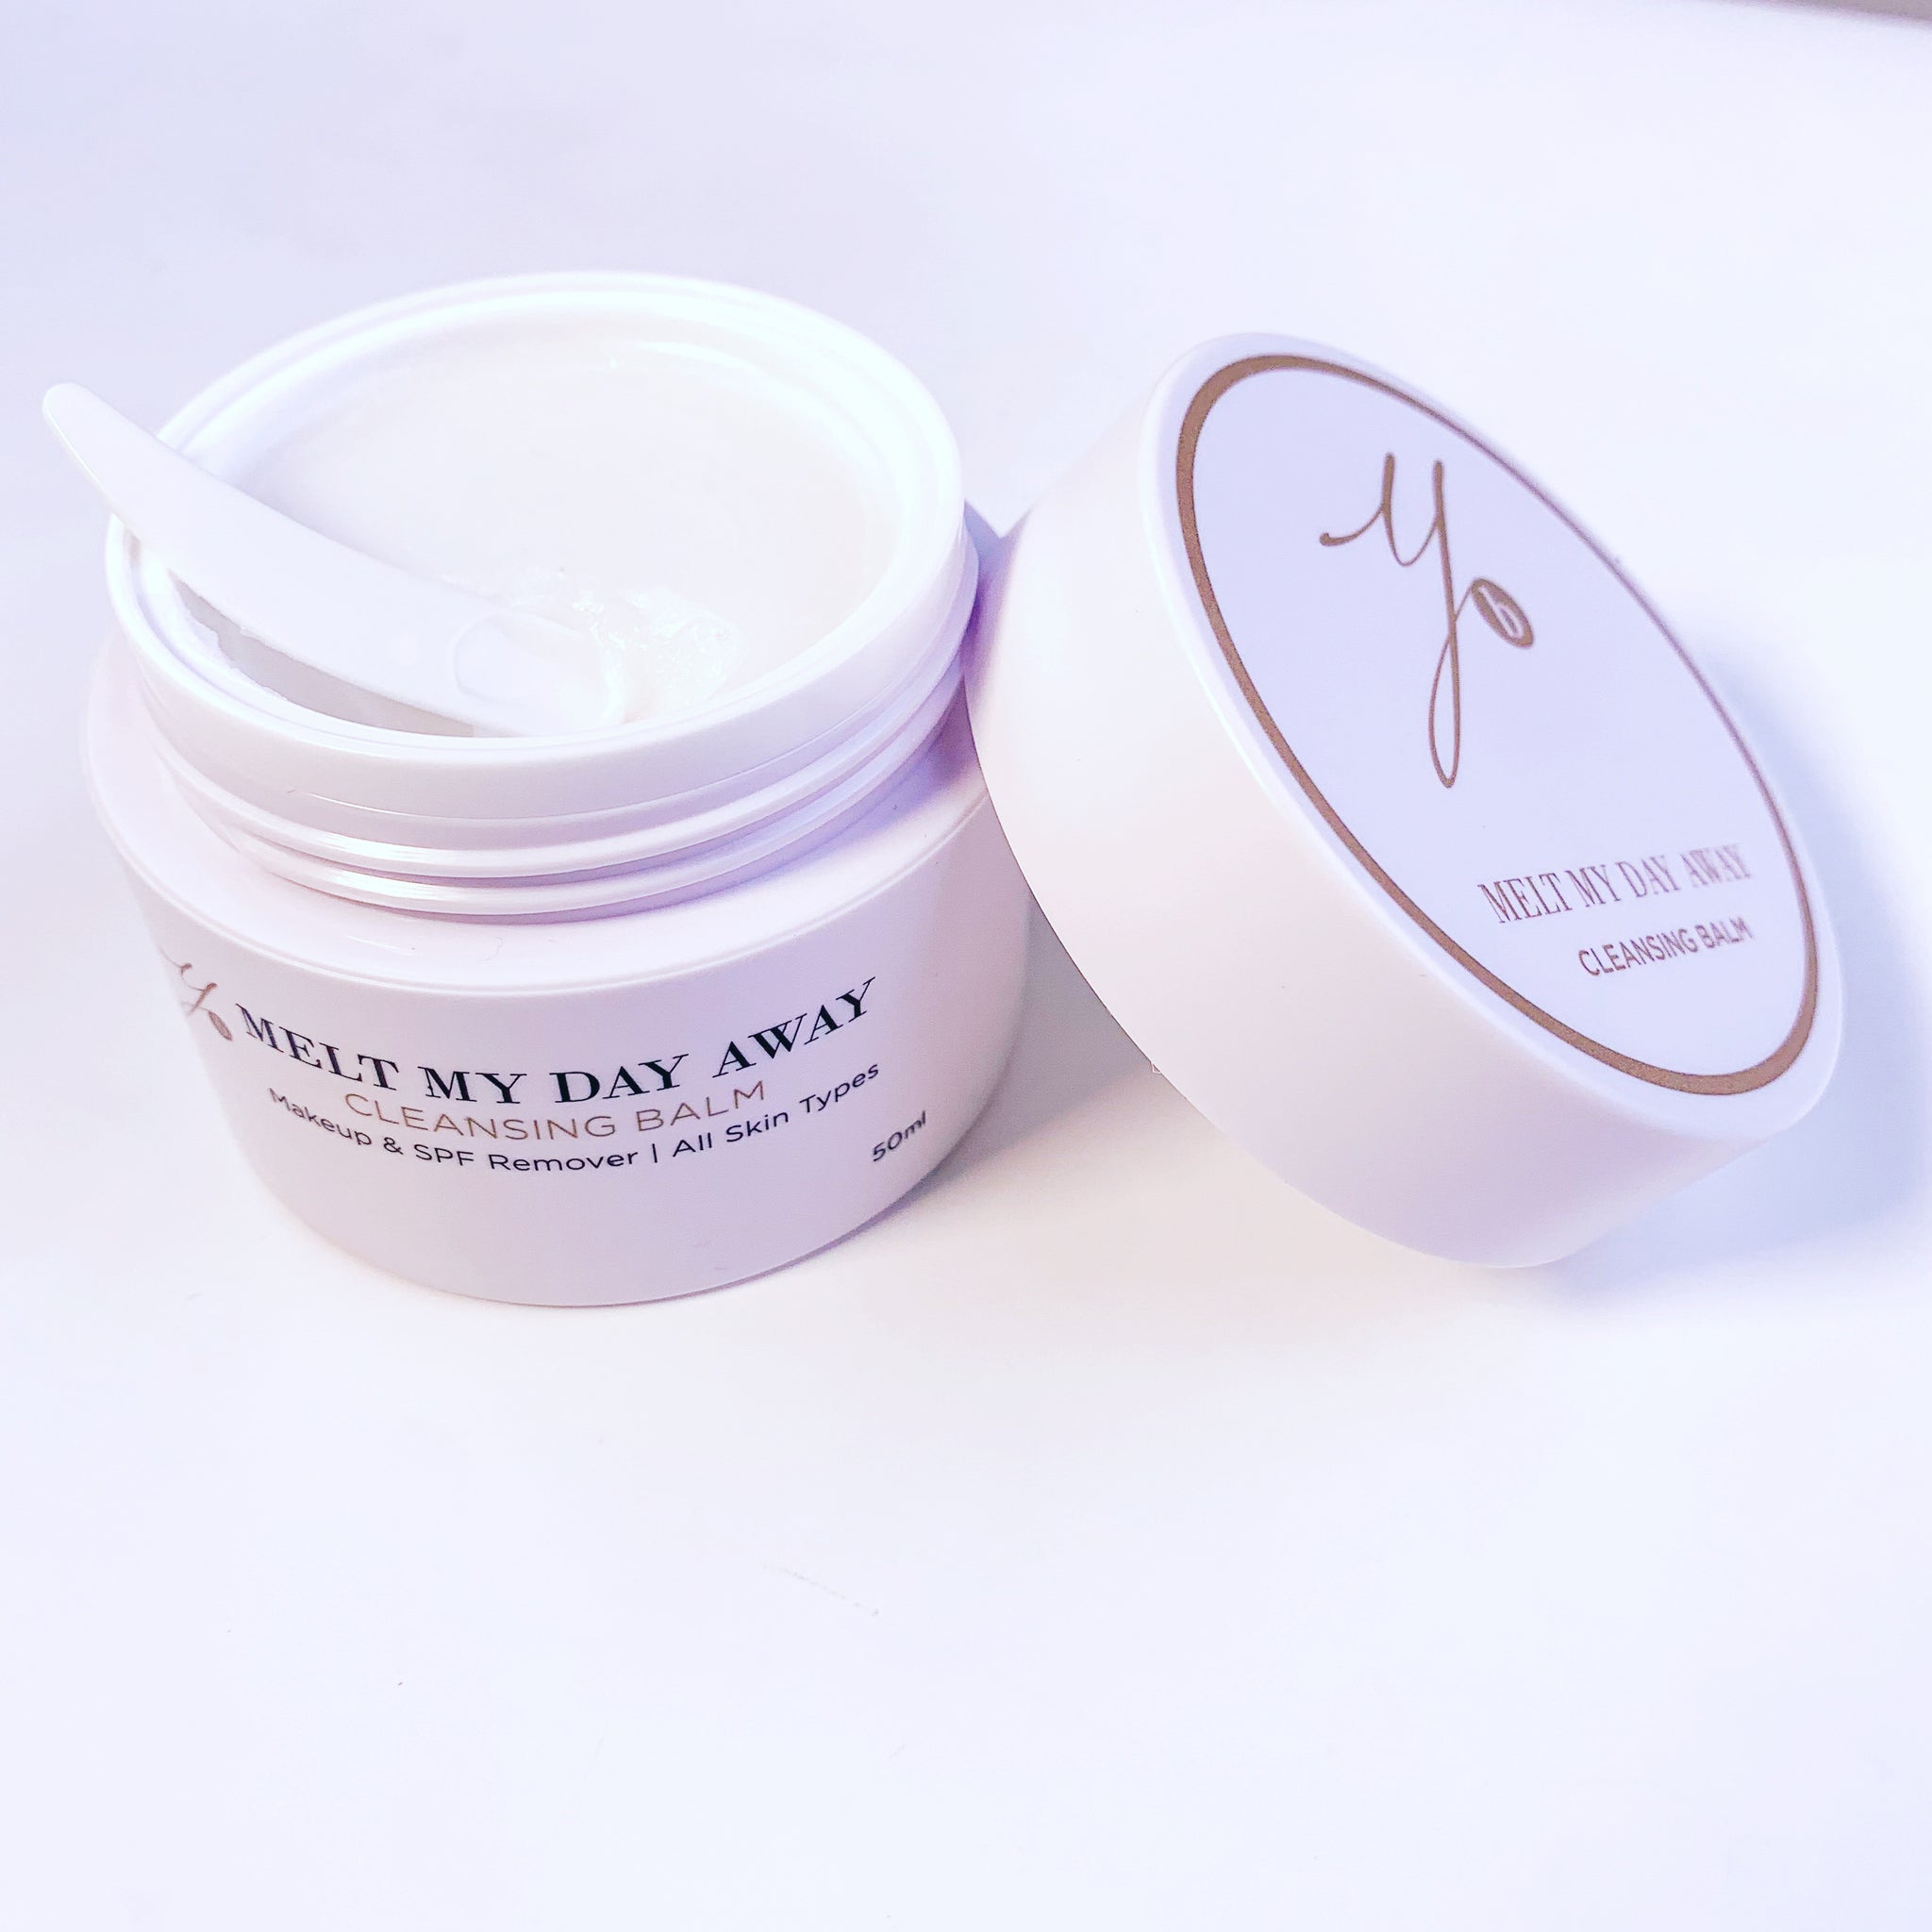 MELT MY DAY AWAY Cleansing Balm